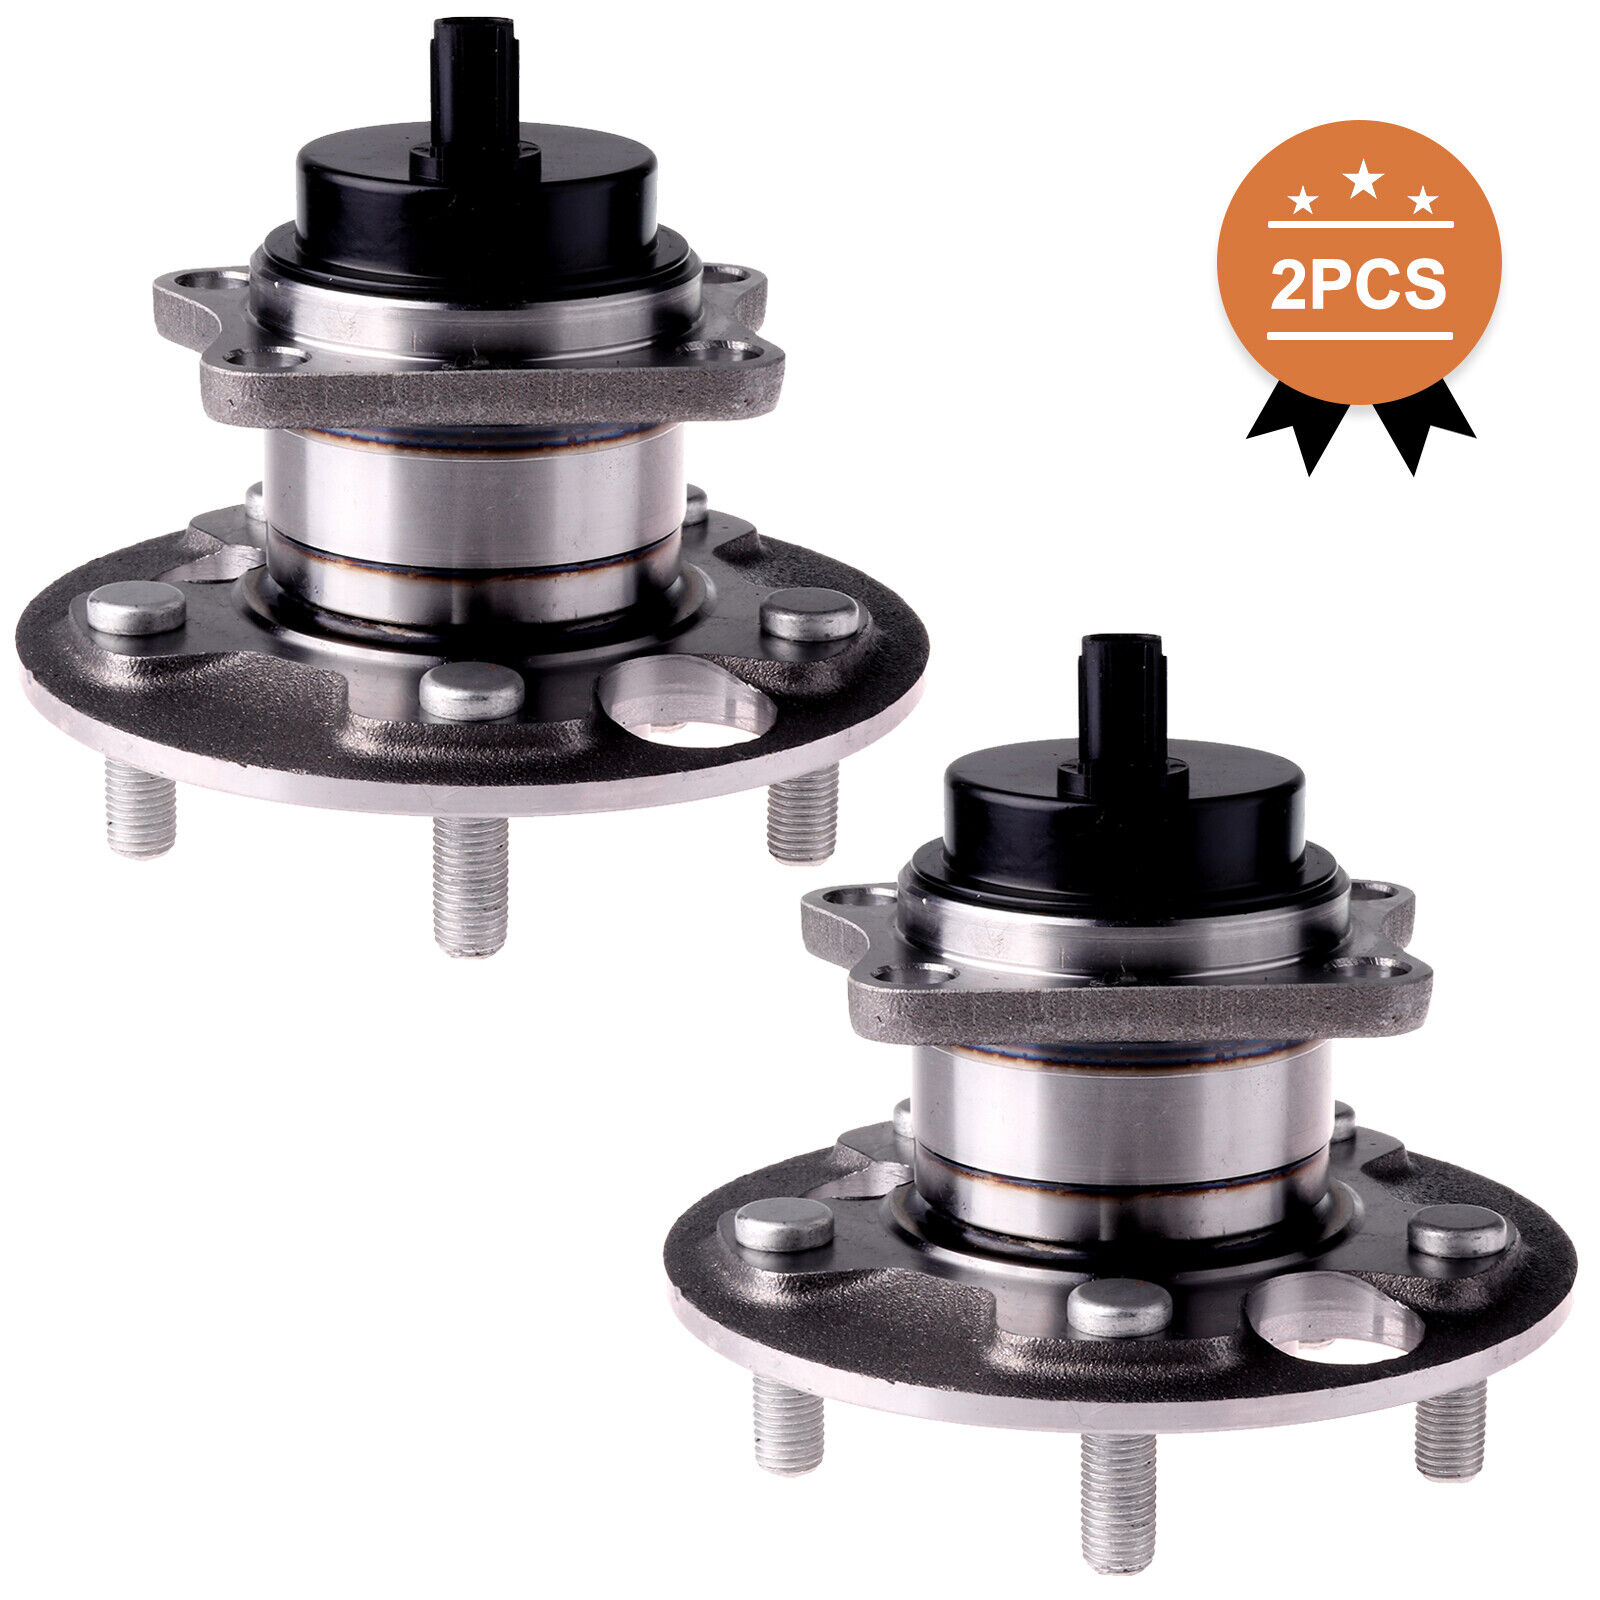 2×Rear Wheel Hub Bearing Assembly For 2008-2015 Scion Xb 2.4L with ABS